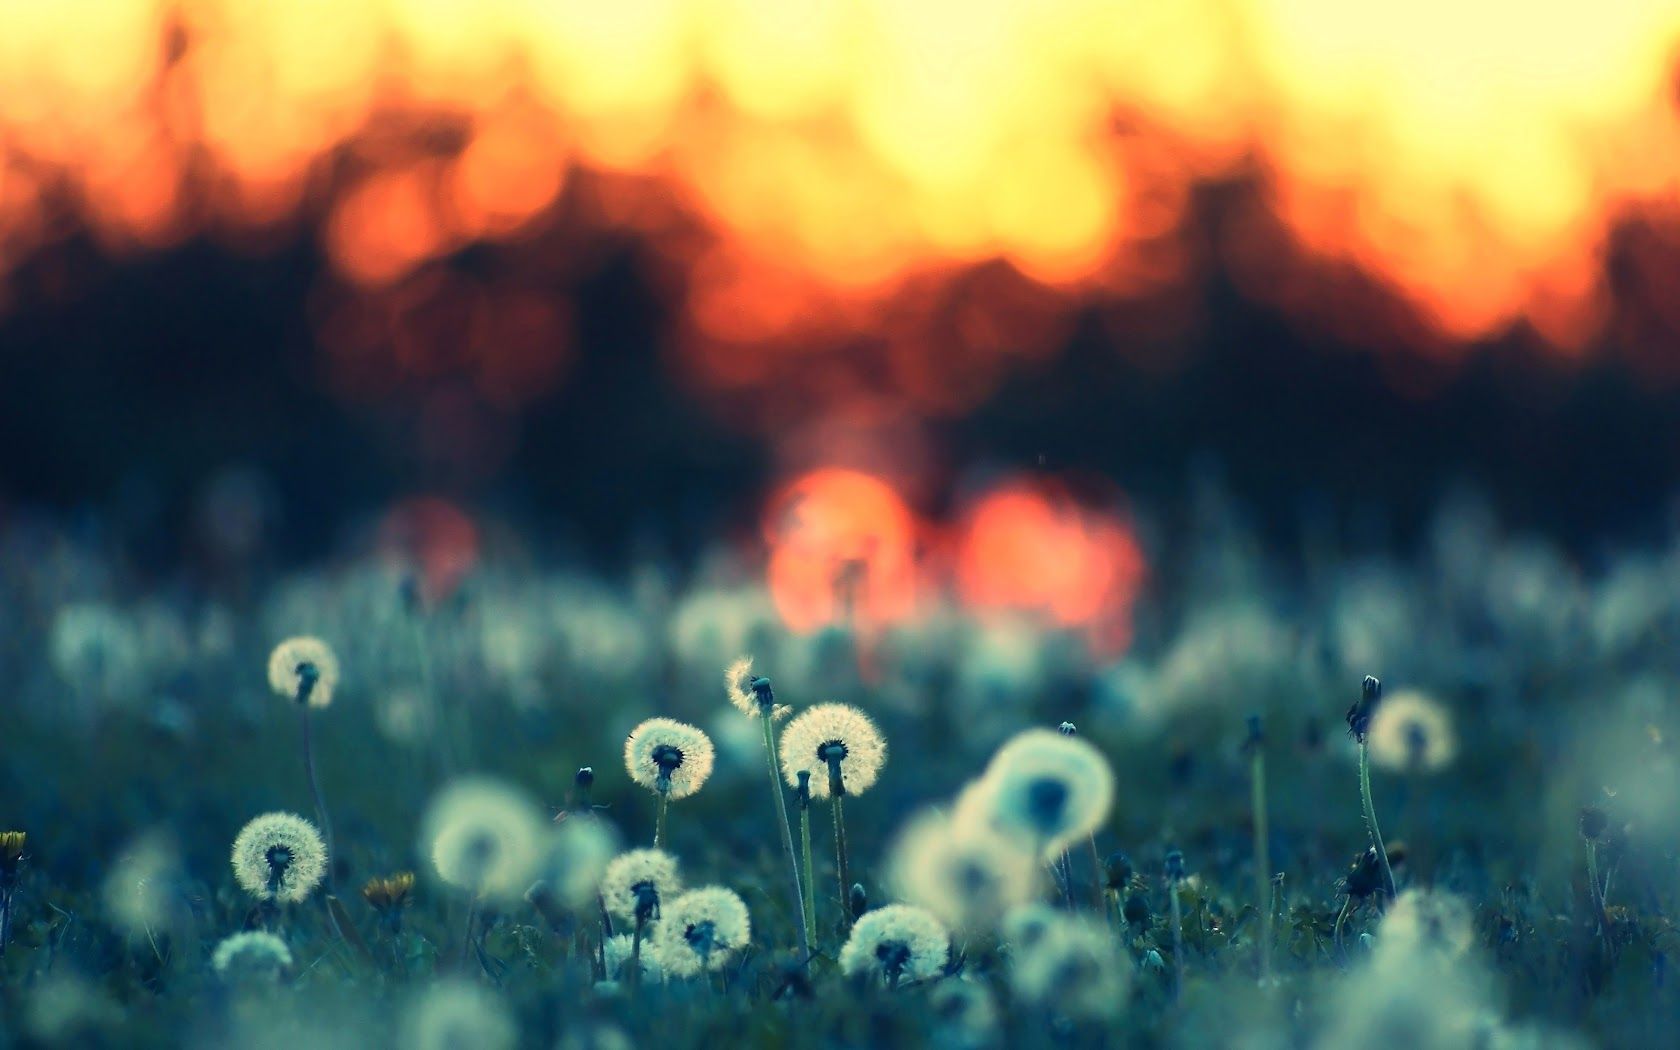 A field of dandelions at sunset - Dandelions